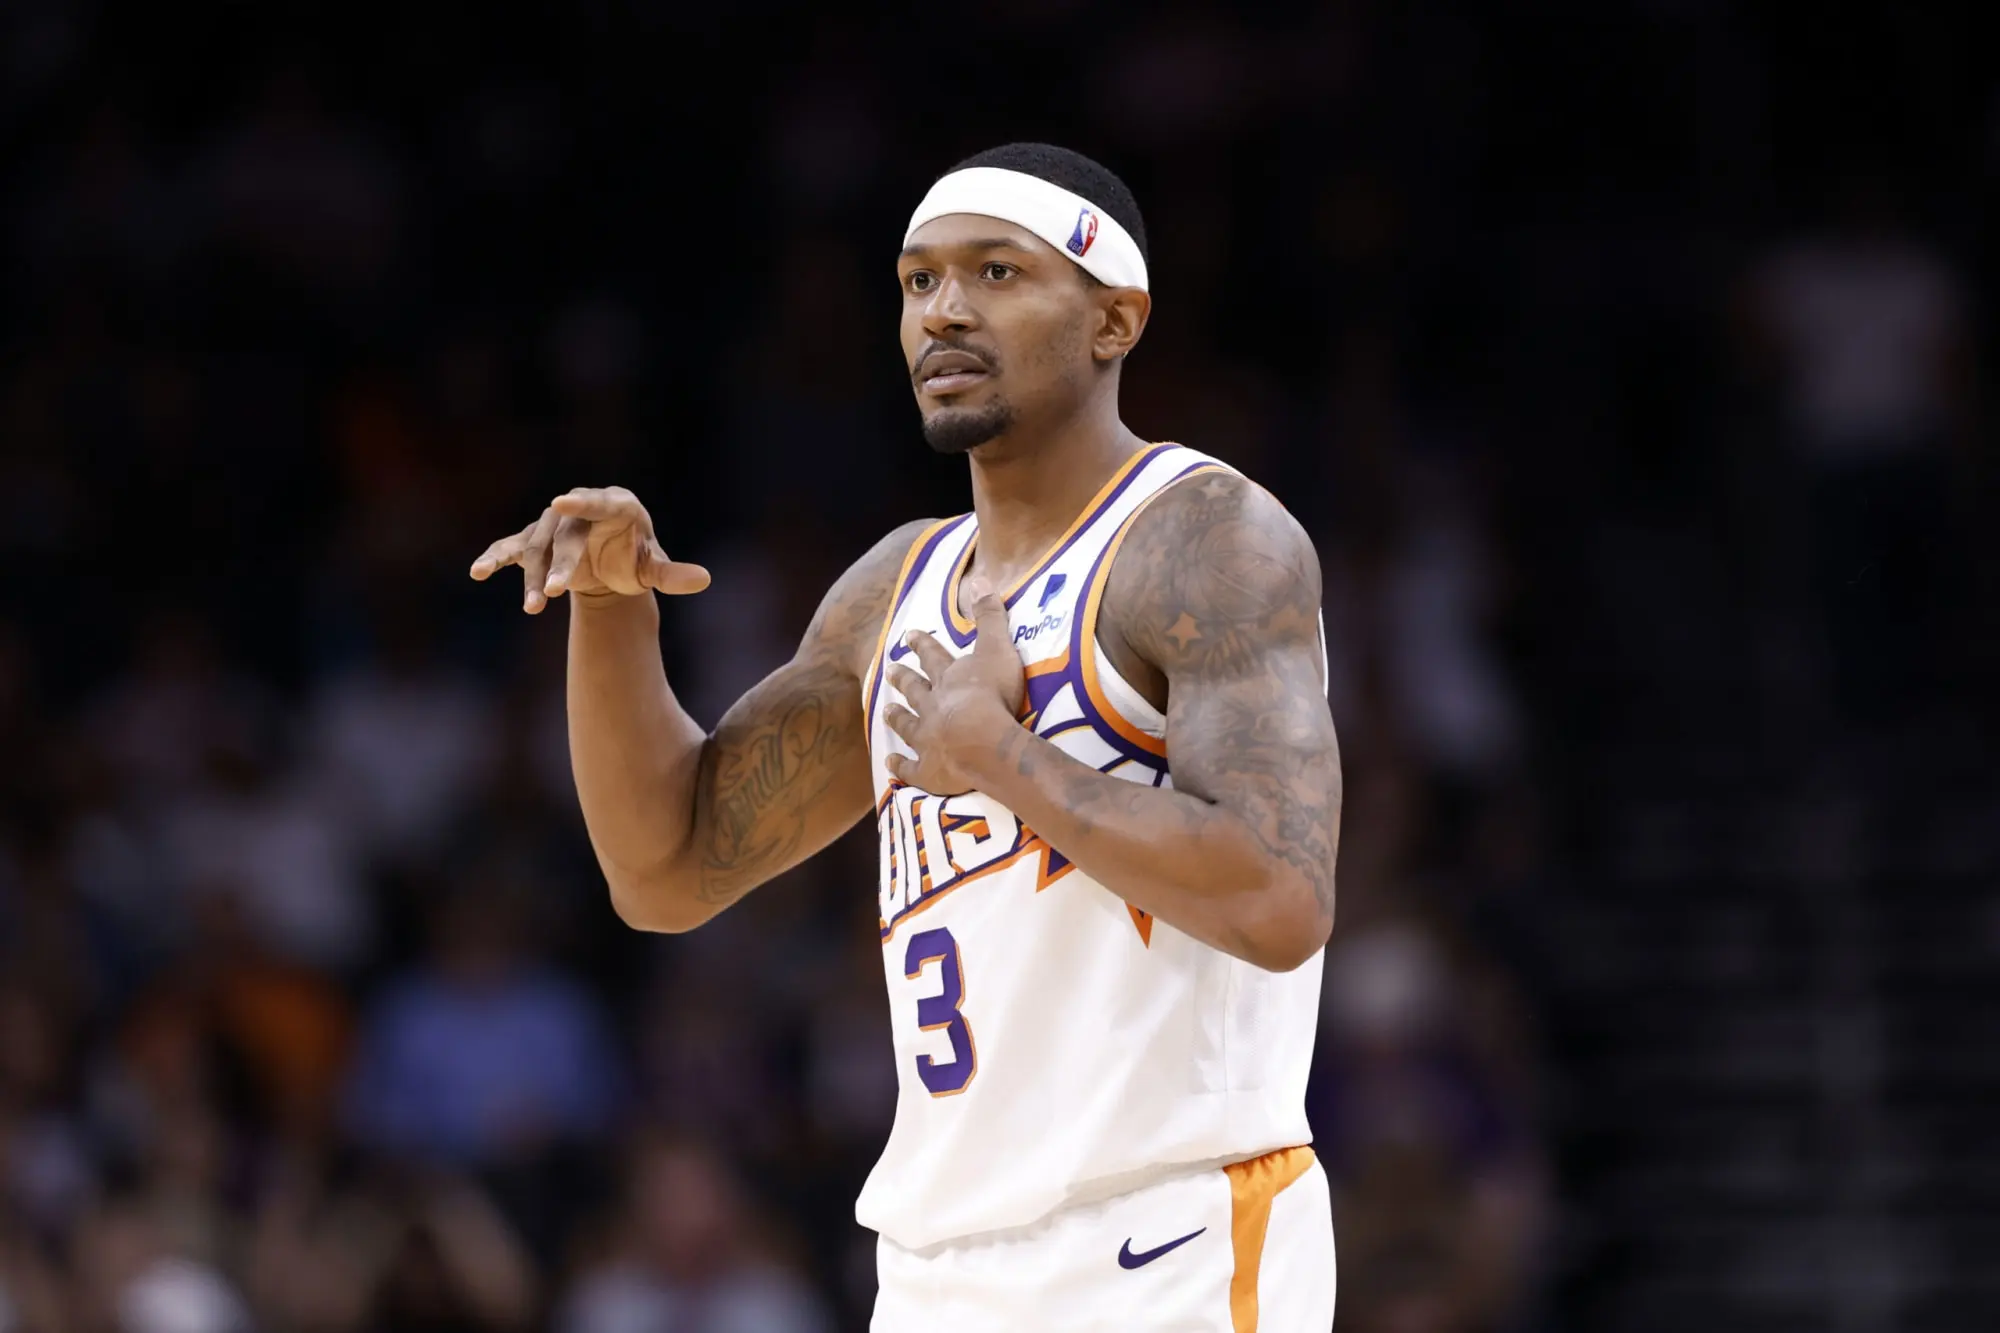 The Phoenix Suns star Bradley Beal has missed a handful of games and is set to miss the Nugget game amid a back injury.